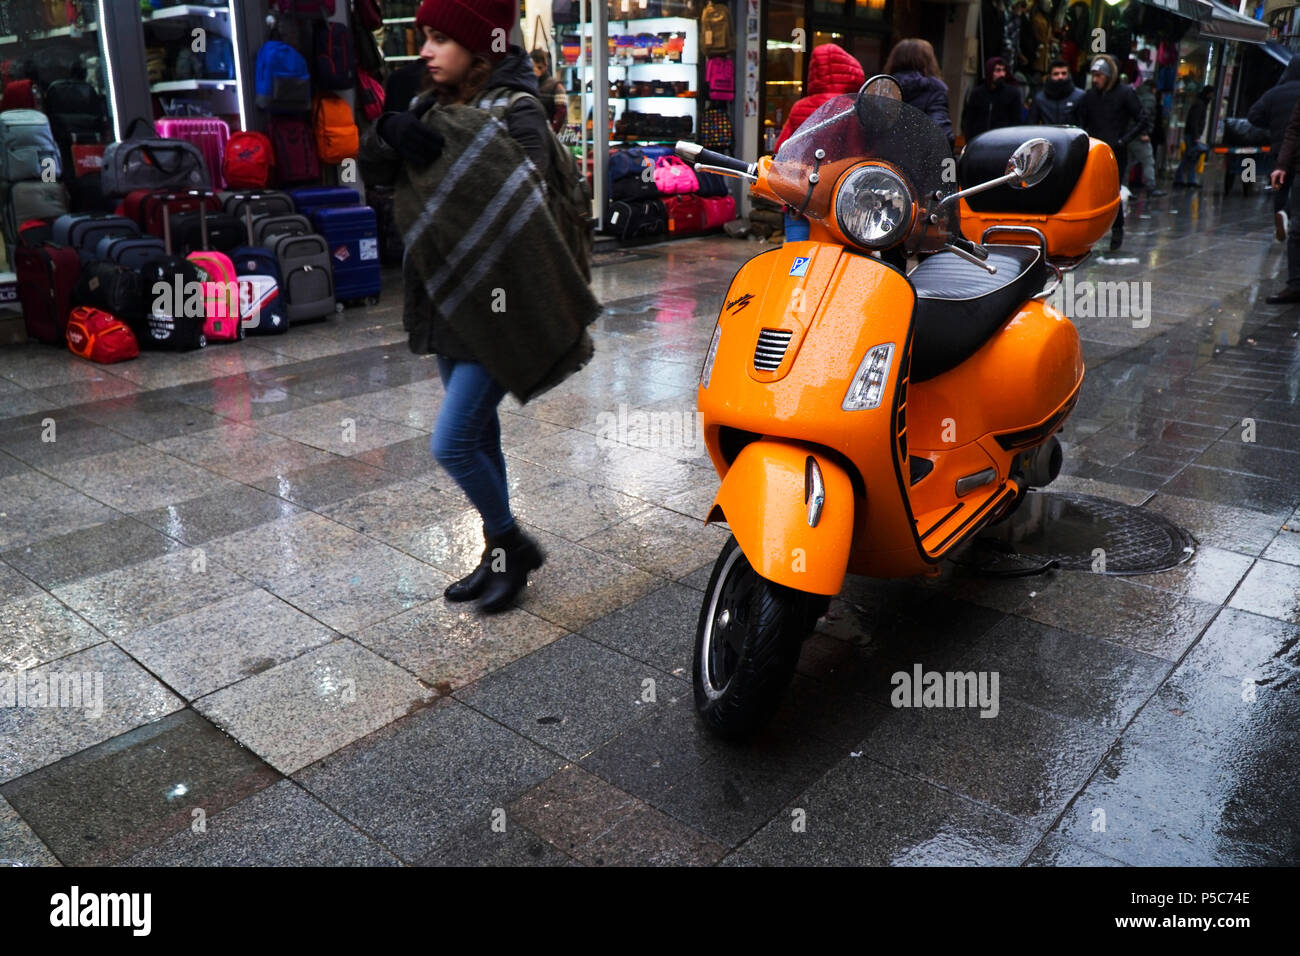 Istanbul, Turkey - December 31, 2016: Details of a wet orange Piaggio Vespa S in a rainy day at Istanbul Kadikoy. A young girl is passing. Stock Photo